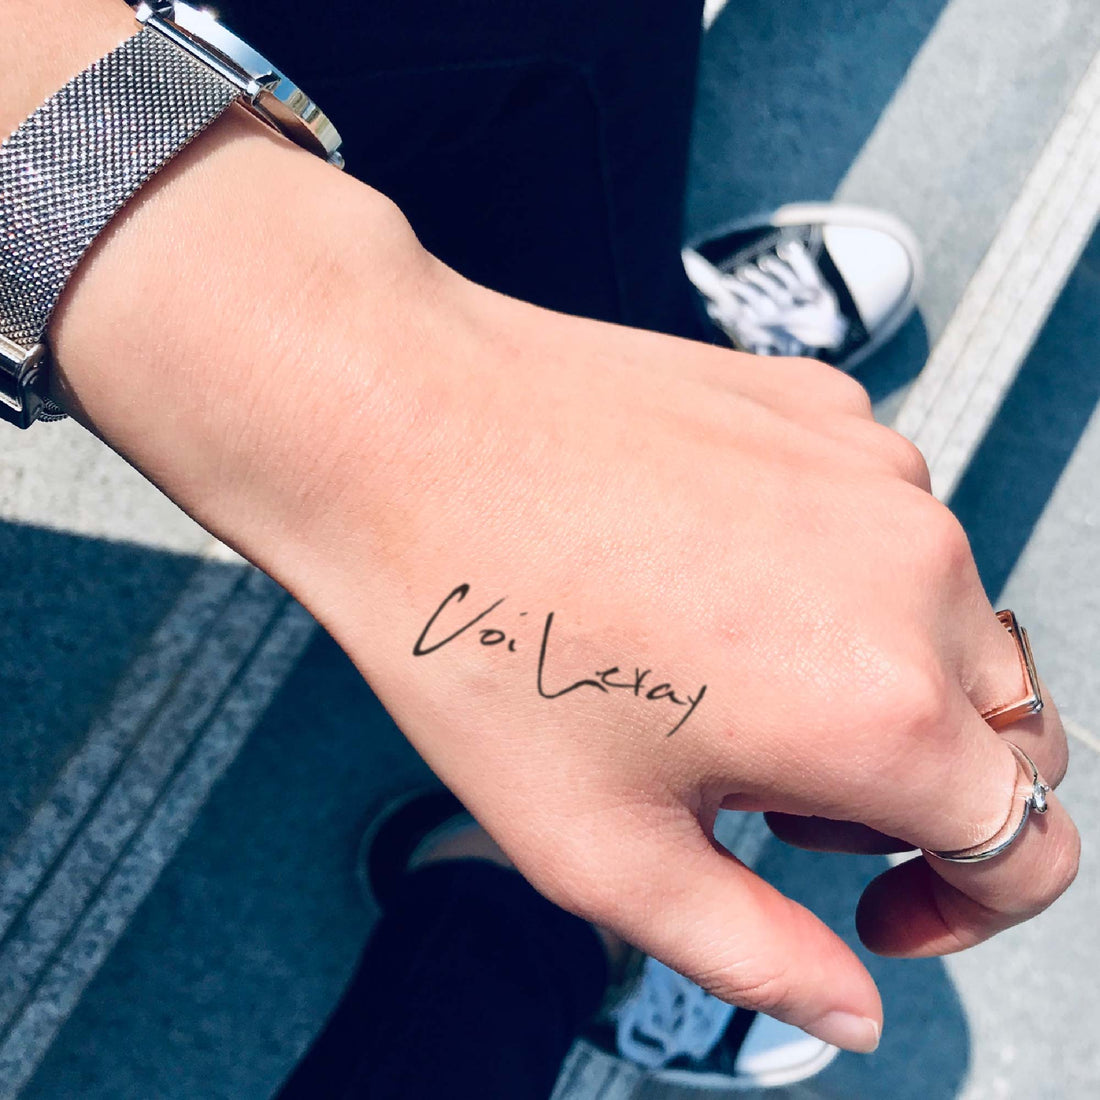 Coi Leray custom temporary tattoo sticker design idea inspiration meanings removal arm wrist hand words font name signature calligraphy lyrics tour concert outfits merch accessory gift souvenir costumes wear dress up code